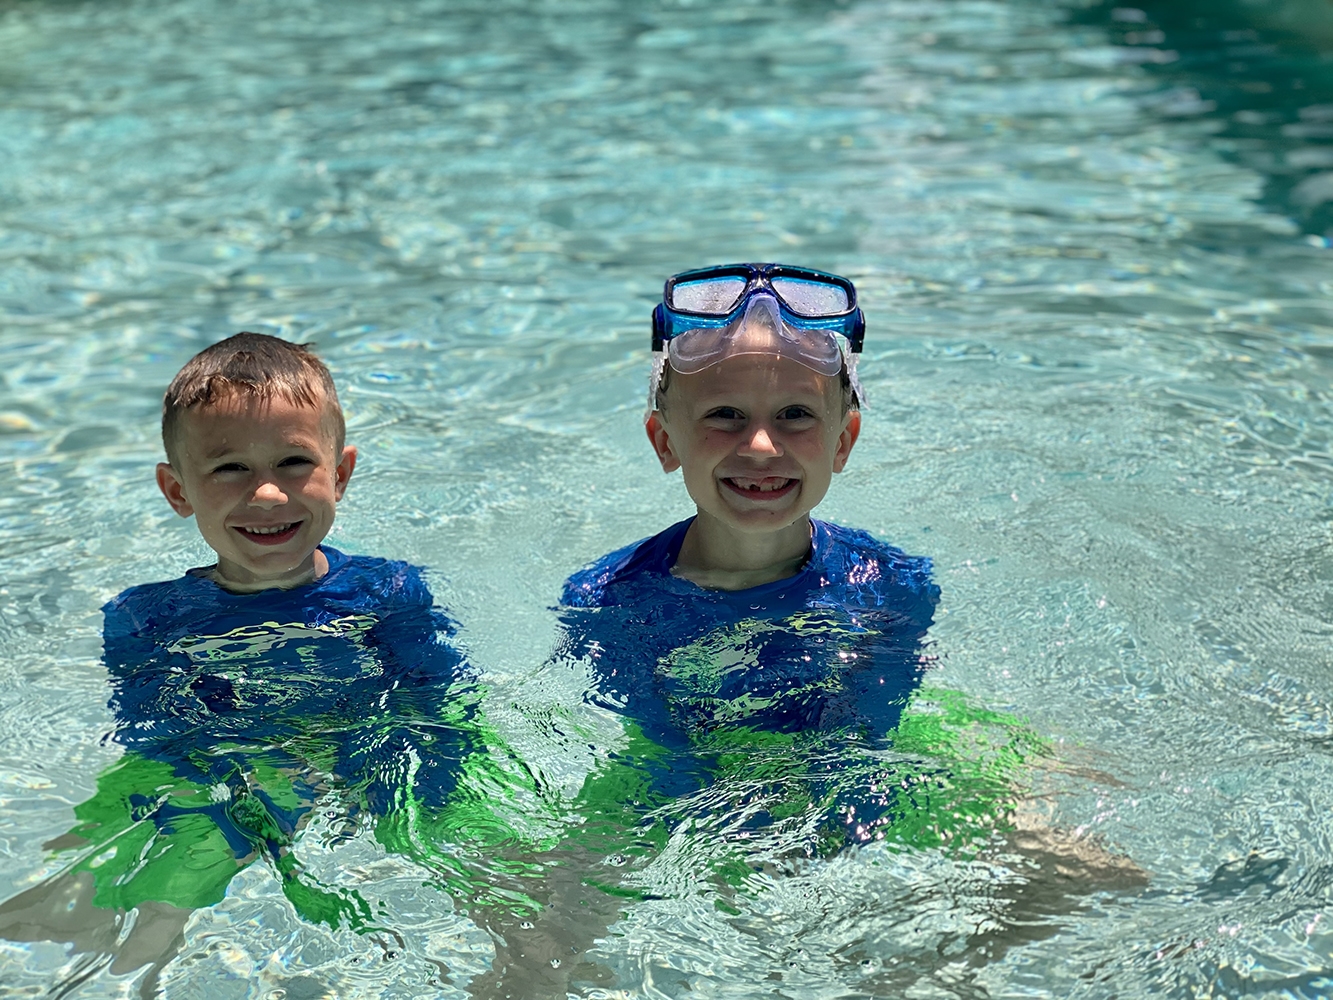 Summer fun in the sun: protect your kids!